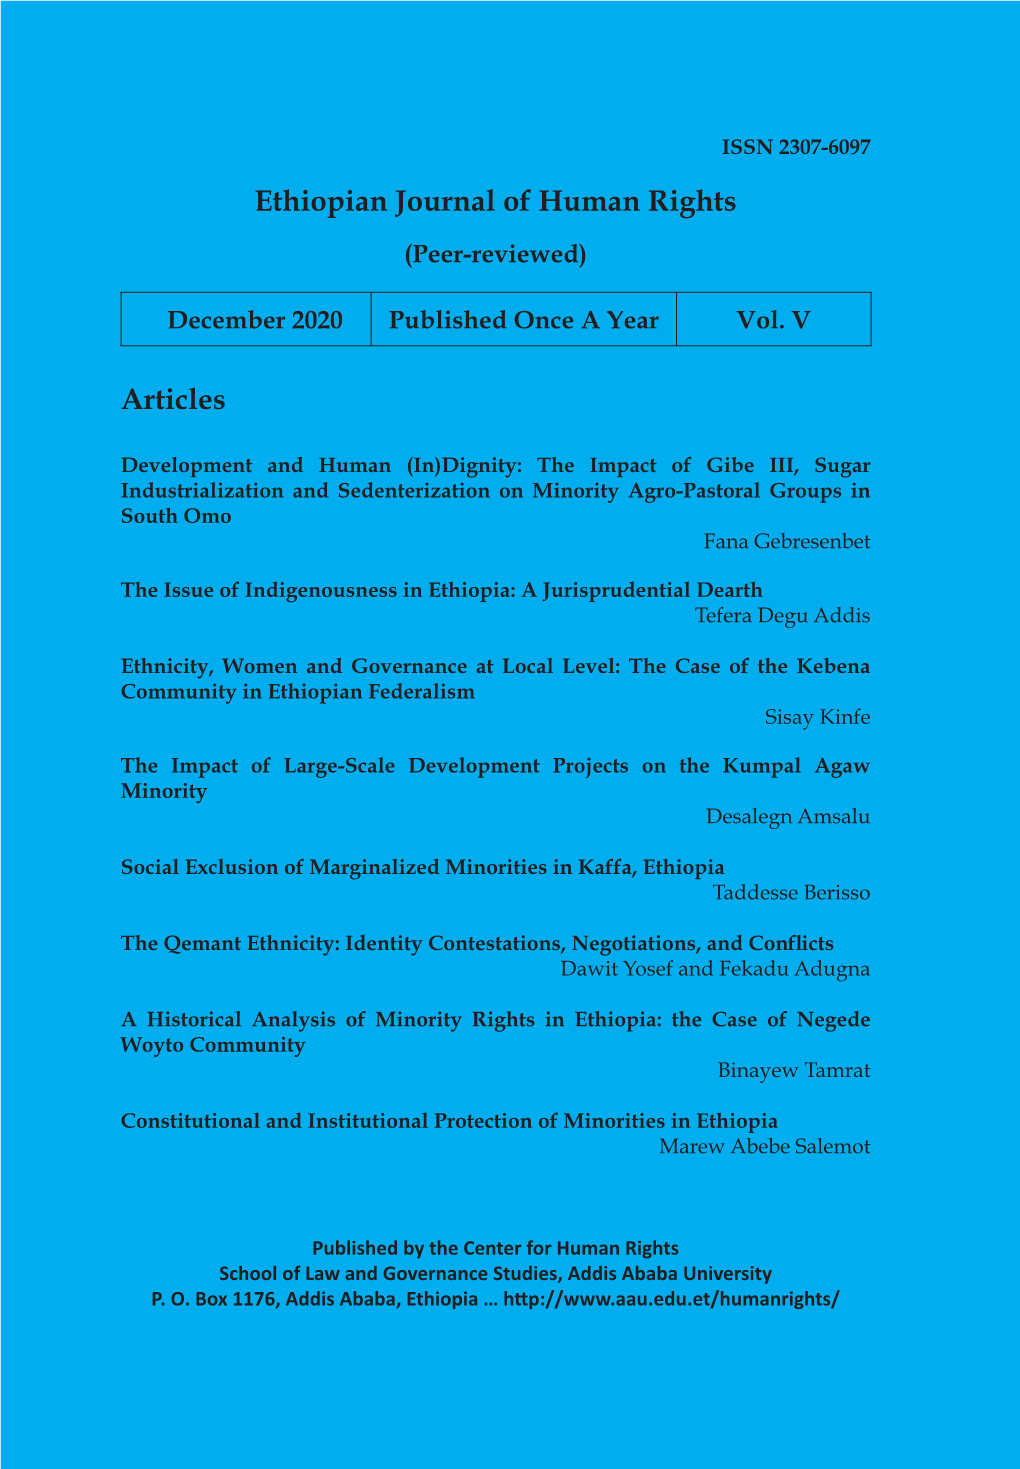 Ethiopian Journal of Human Rights Articles